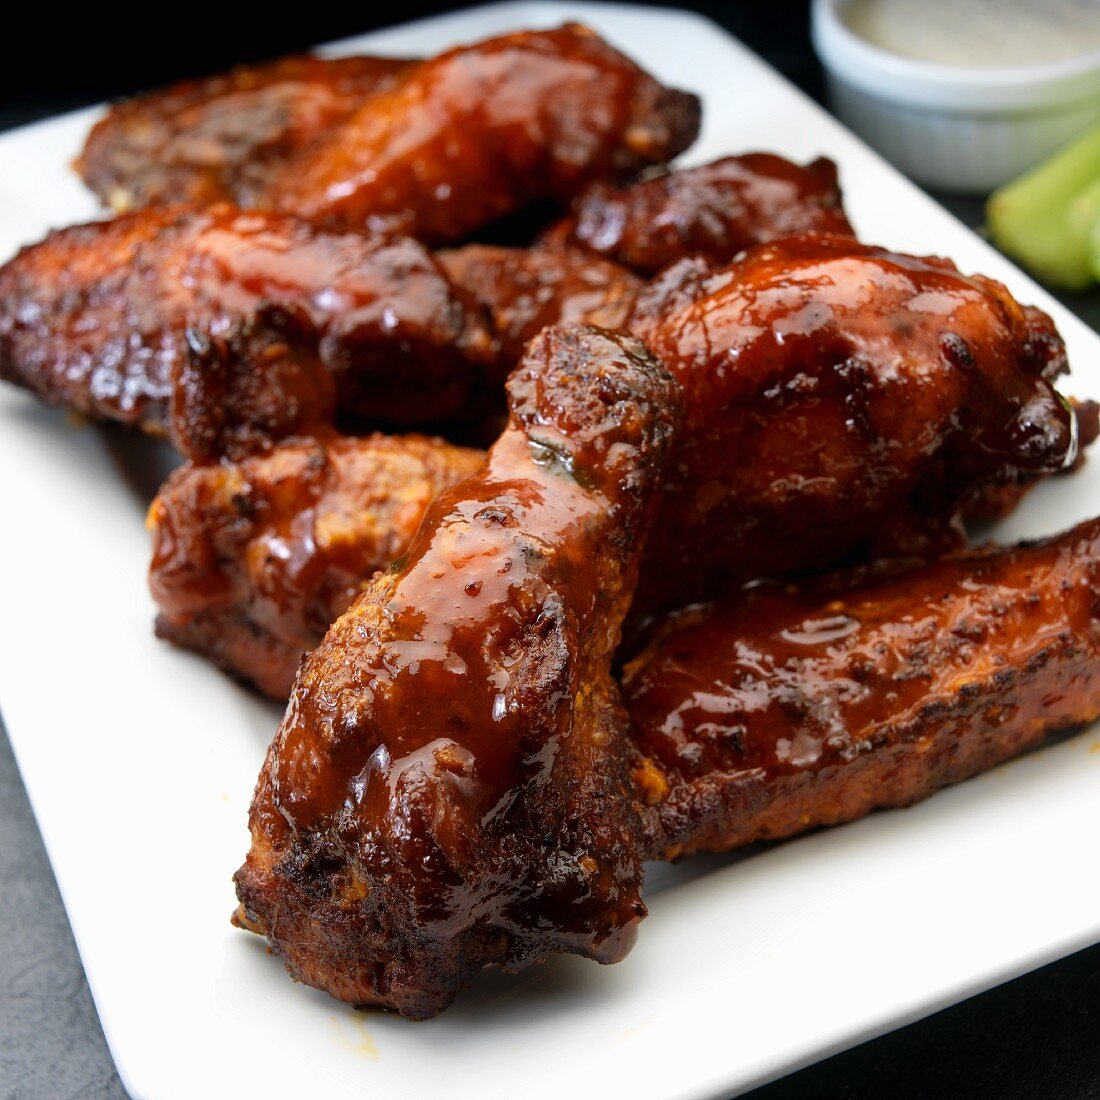 Smoked chicken wings with ranch dressing and celery